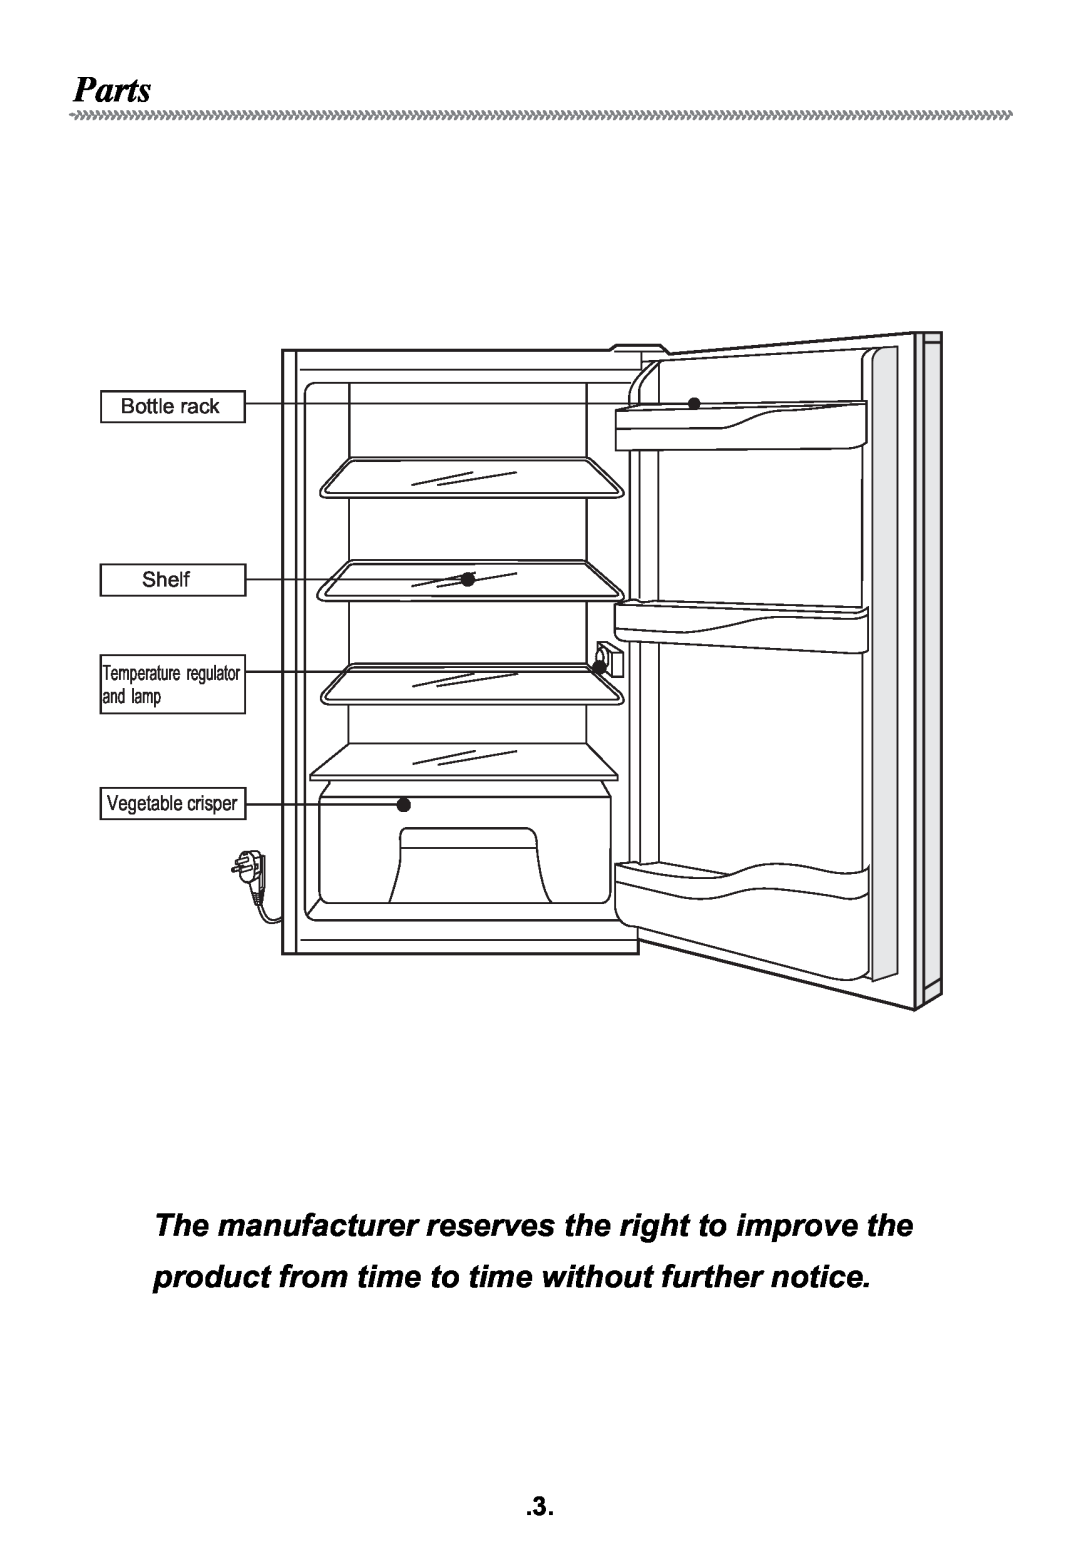 Haier HR-135AR/A manual Parts, The manufacturer reserves the right to improve the, Bottle rack, Vegetable crisper 